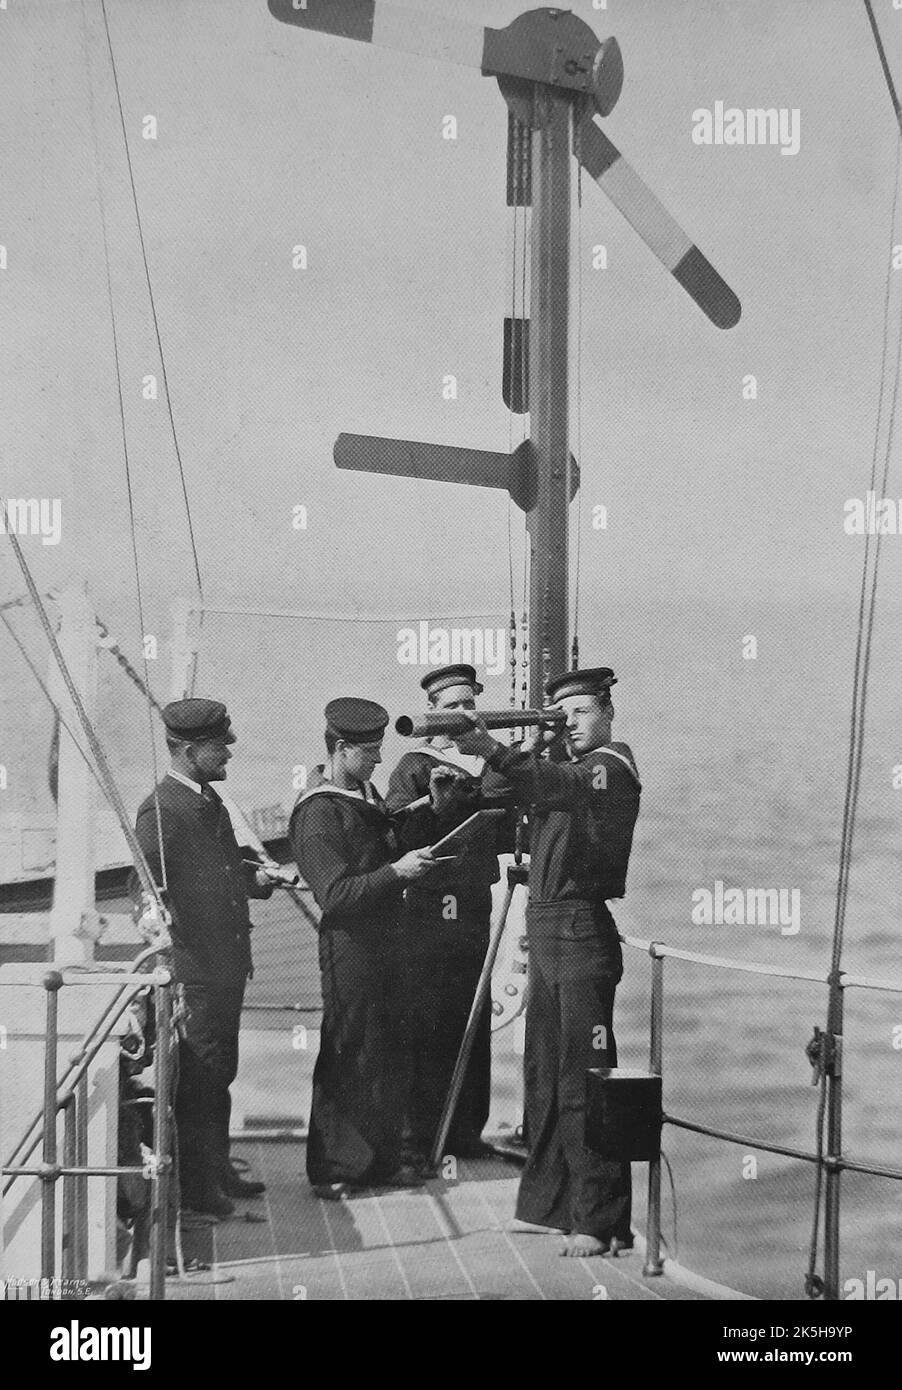 1891. Royal Navy signalmen on the bridge of the Admiral-class battleship, H.M.S. Camperdown, communicating with another ship by semaphore. At the time, Camperdown was the flagship of the Channel Fleet. Stock Photo